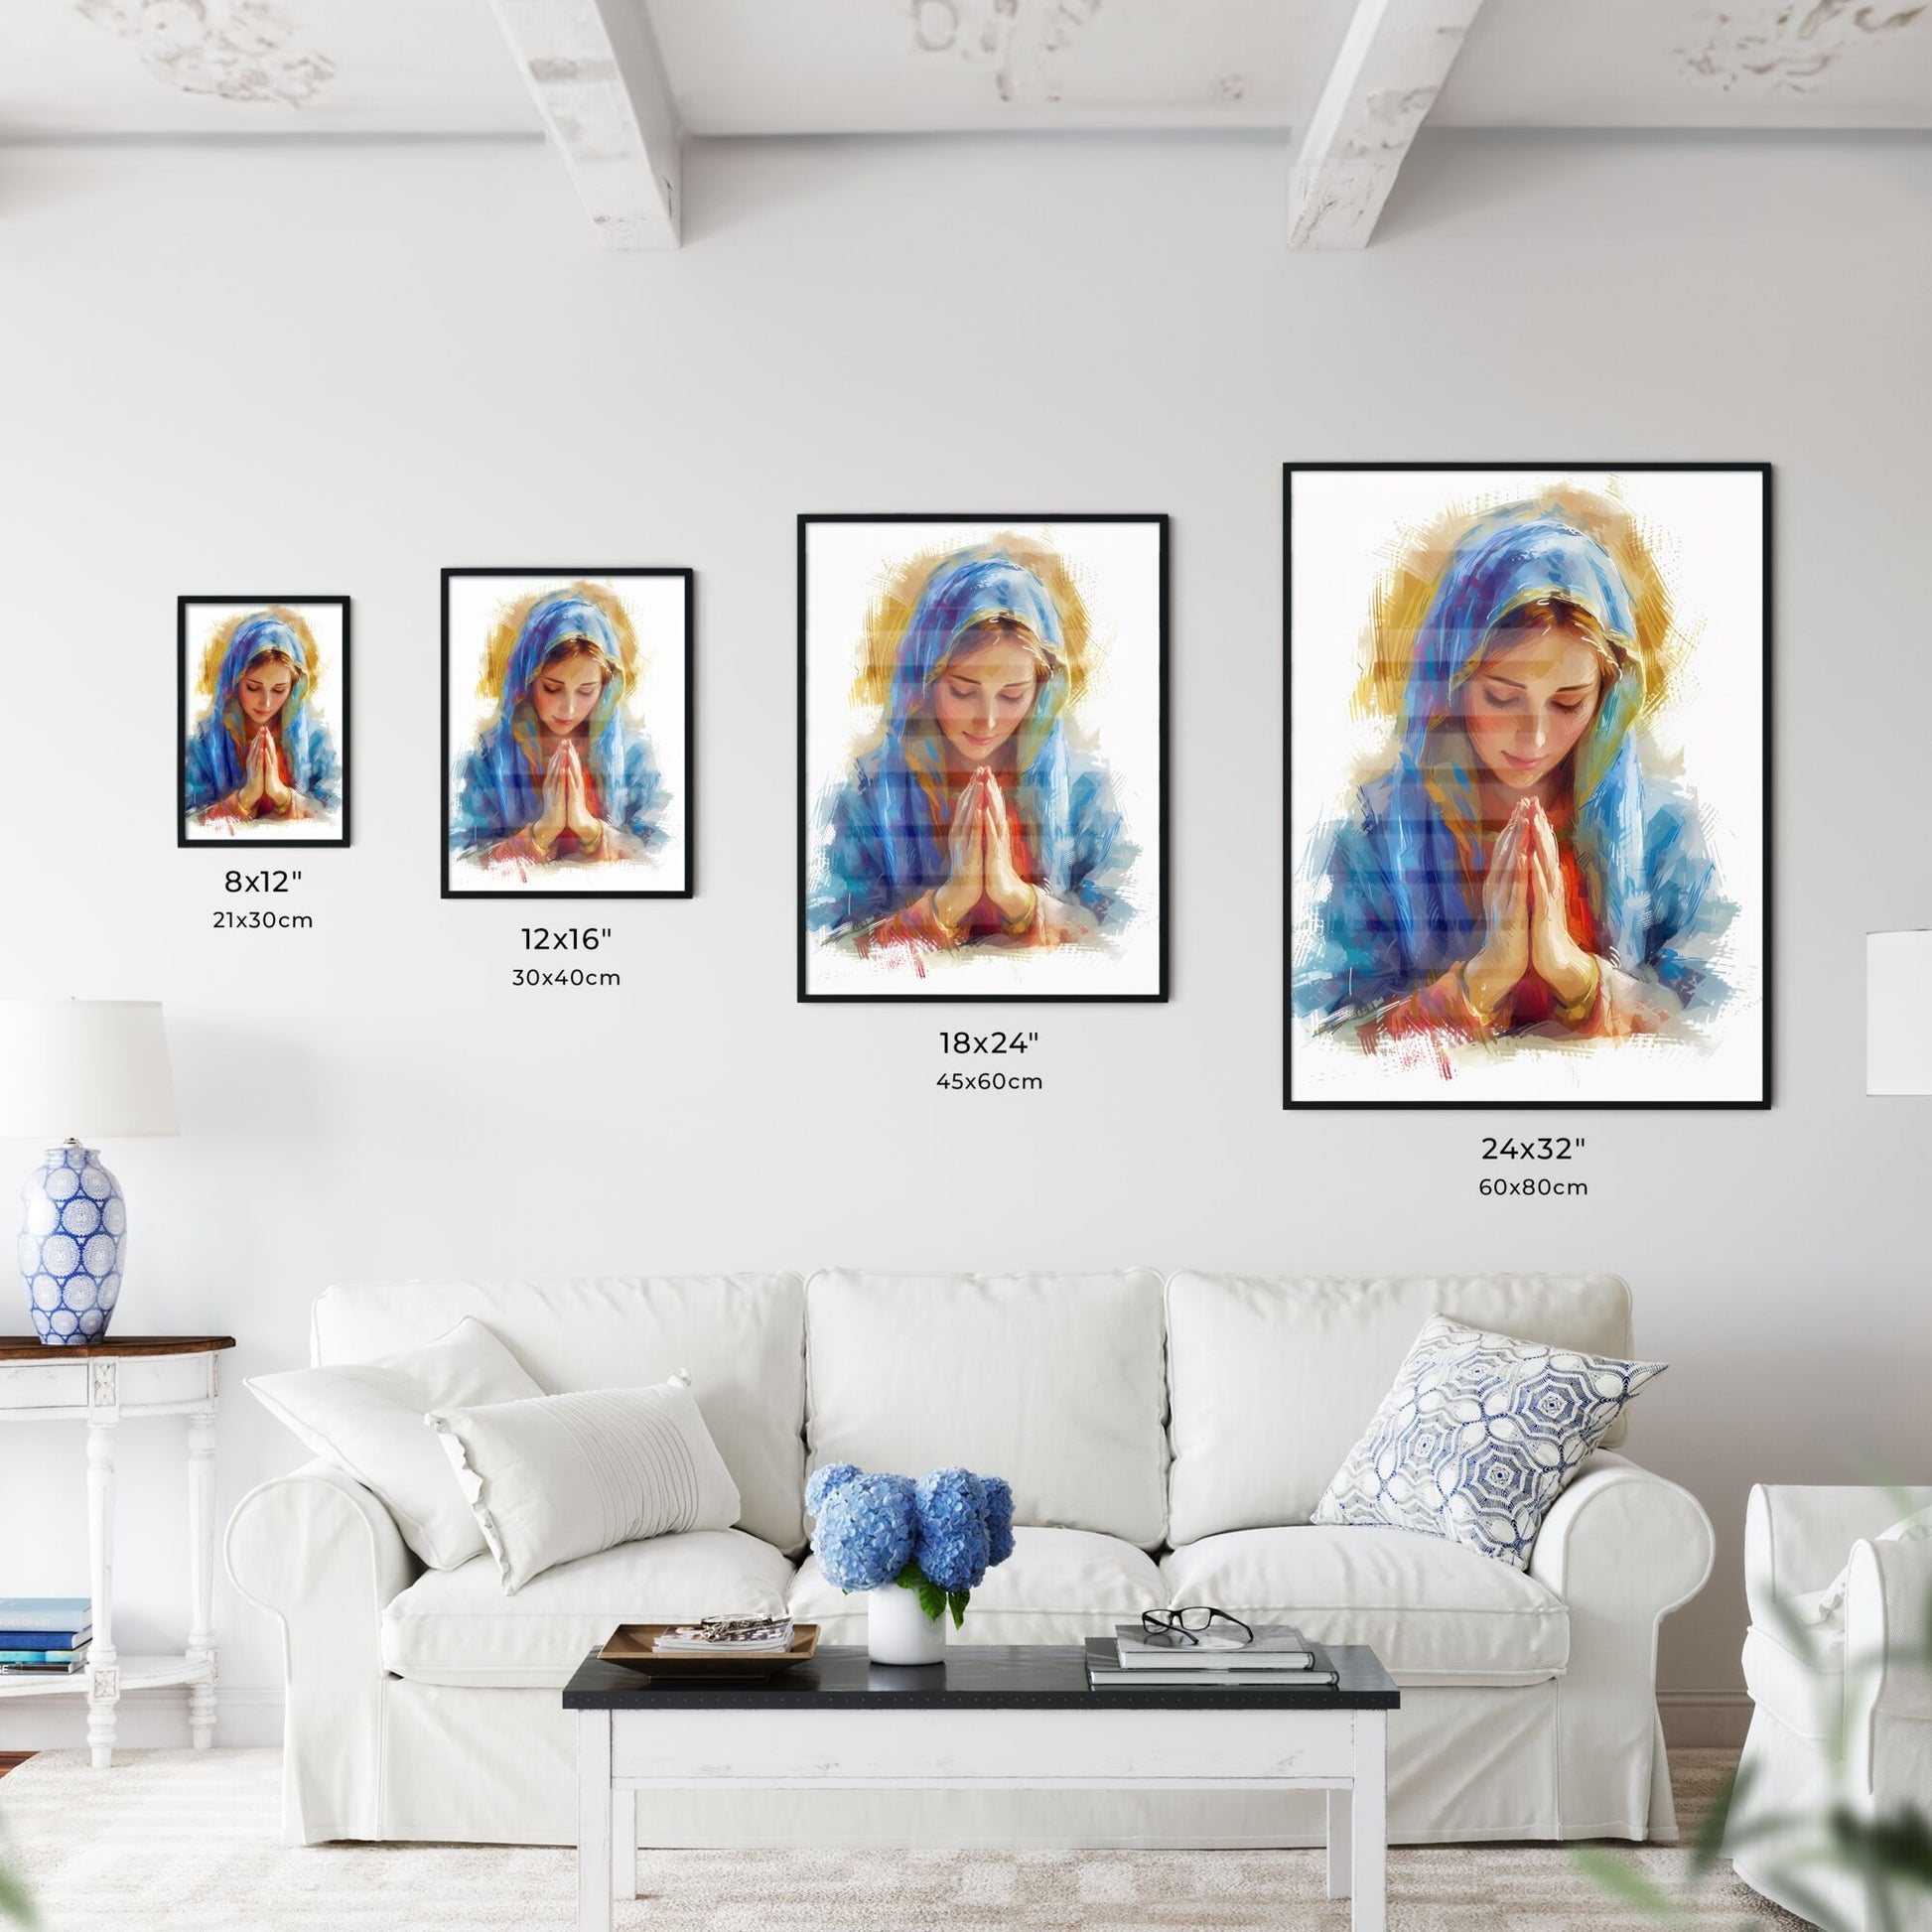 Mary Mother of God Poster, halo above her head, hands in praying sign - Art print of a woman with a blue head scarf praying Default Title